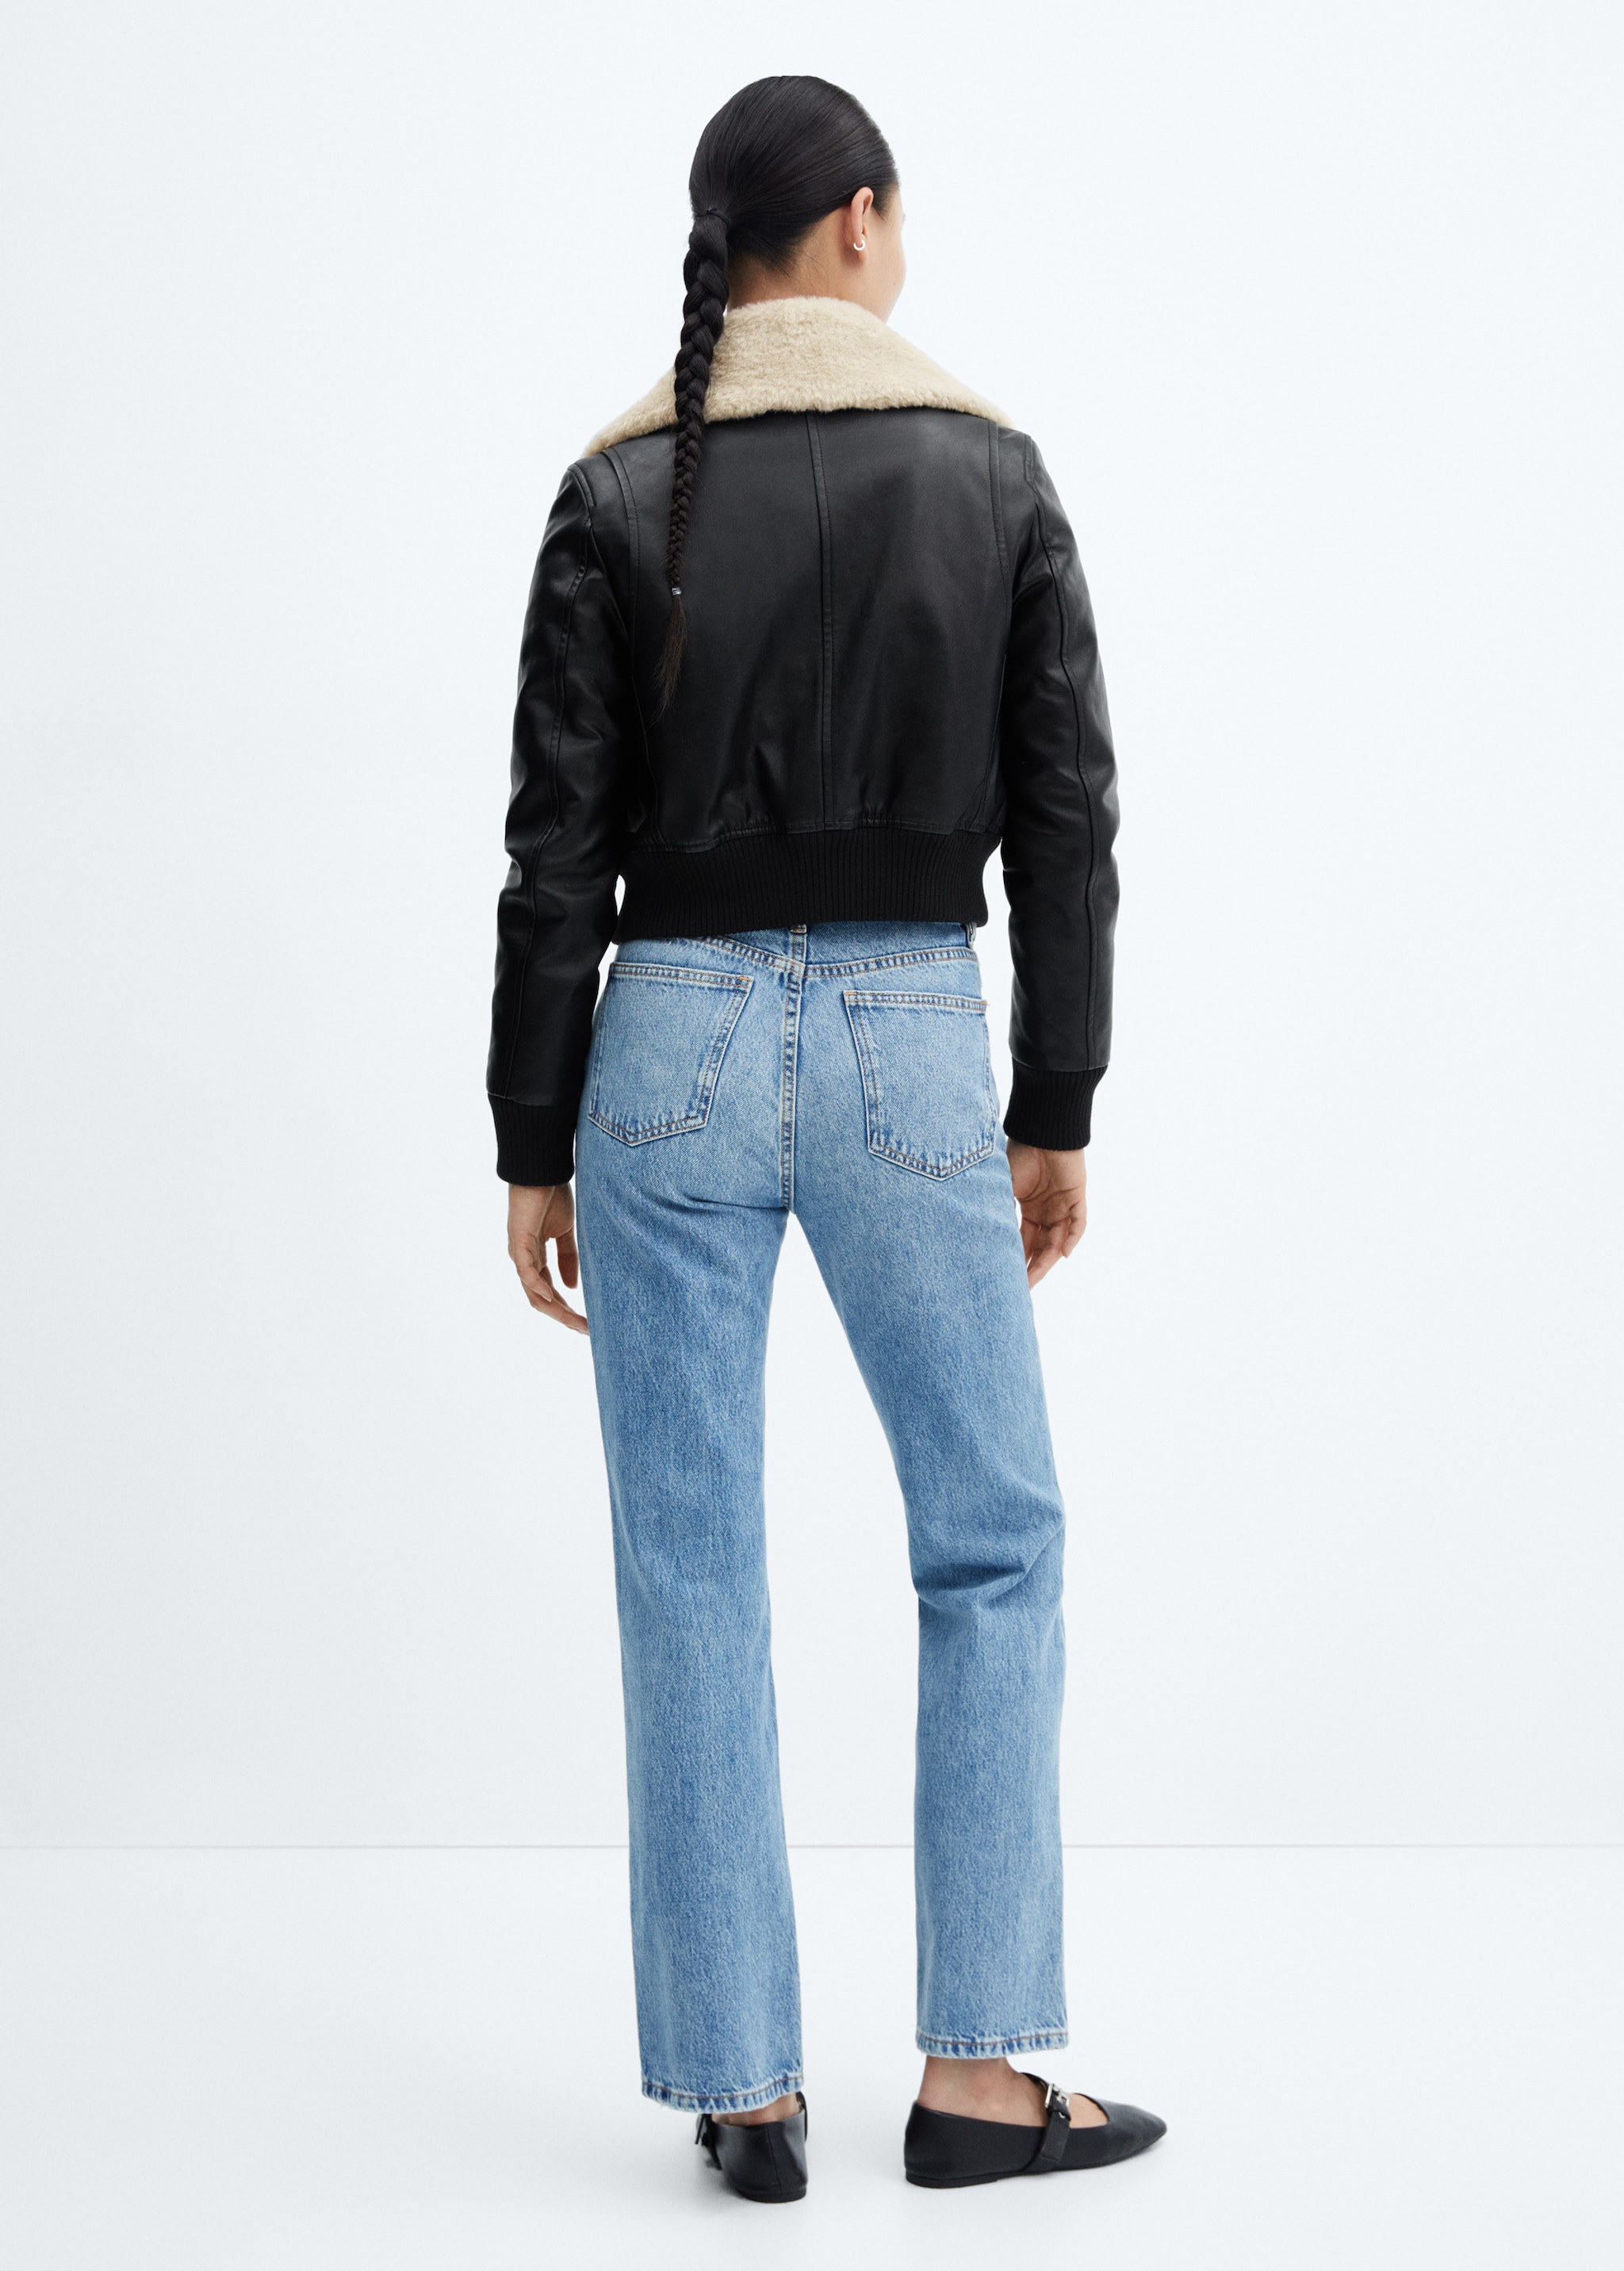 Shearling-lined bomber jacket - Reverse of the article